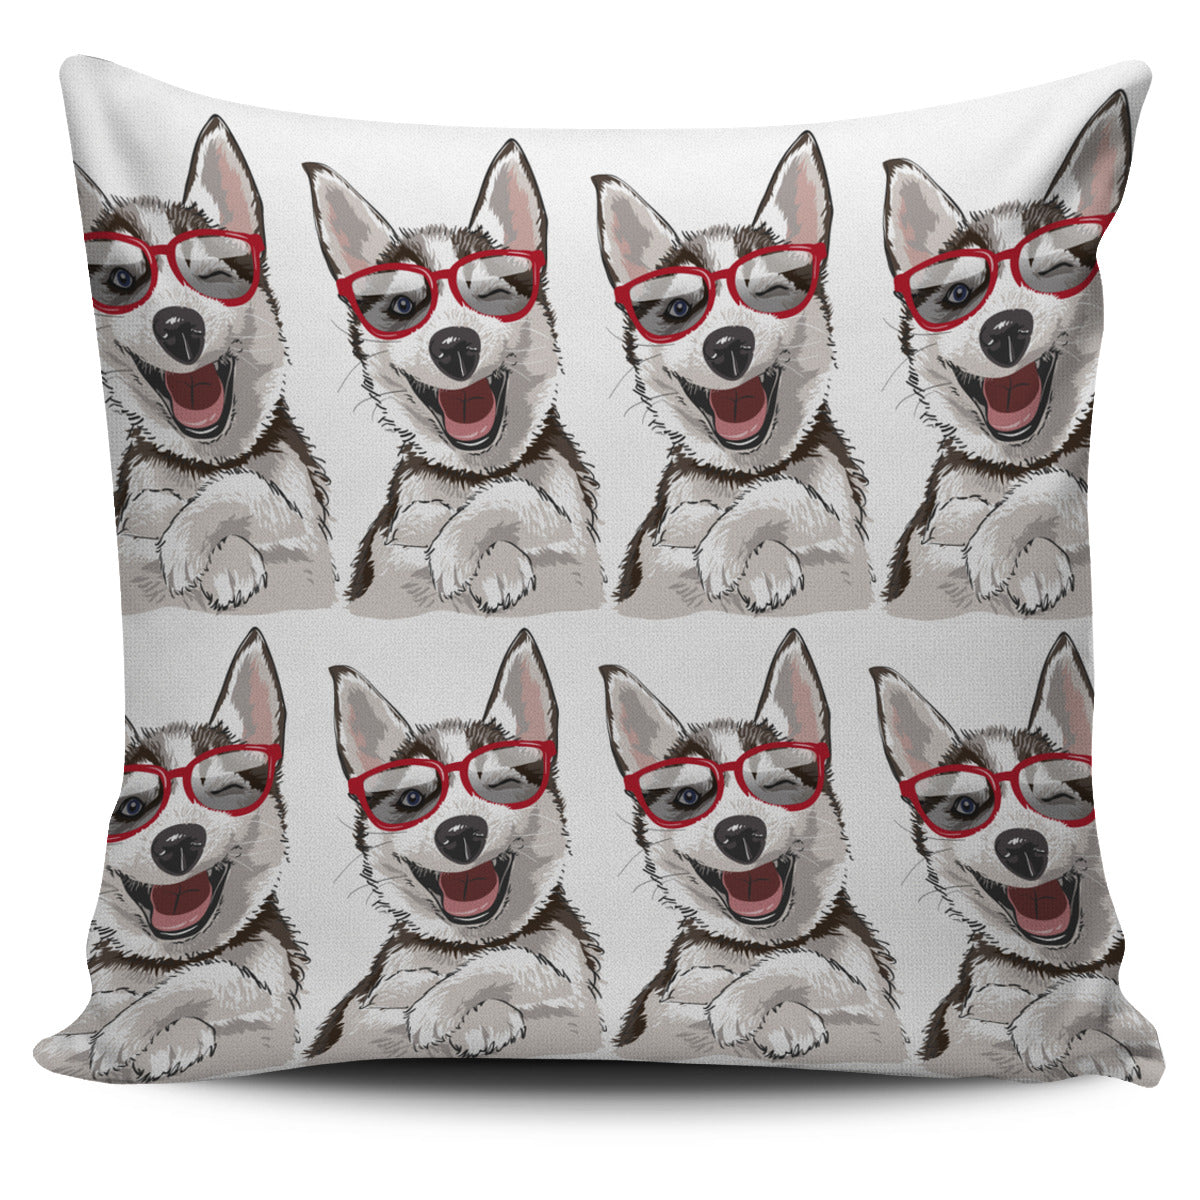 Laughing Dog Pillow Cover - JaZazzy 